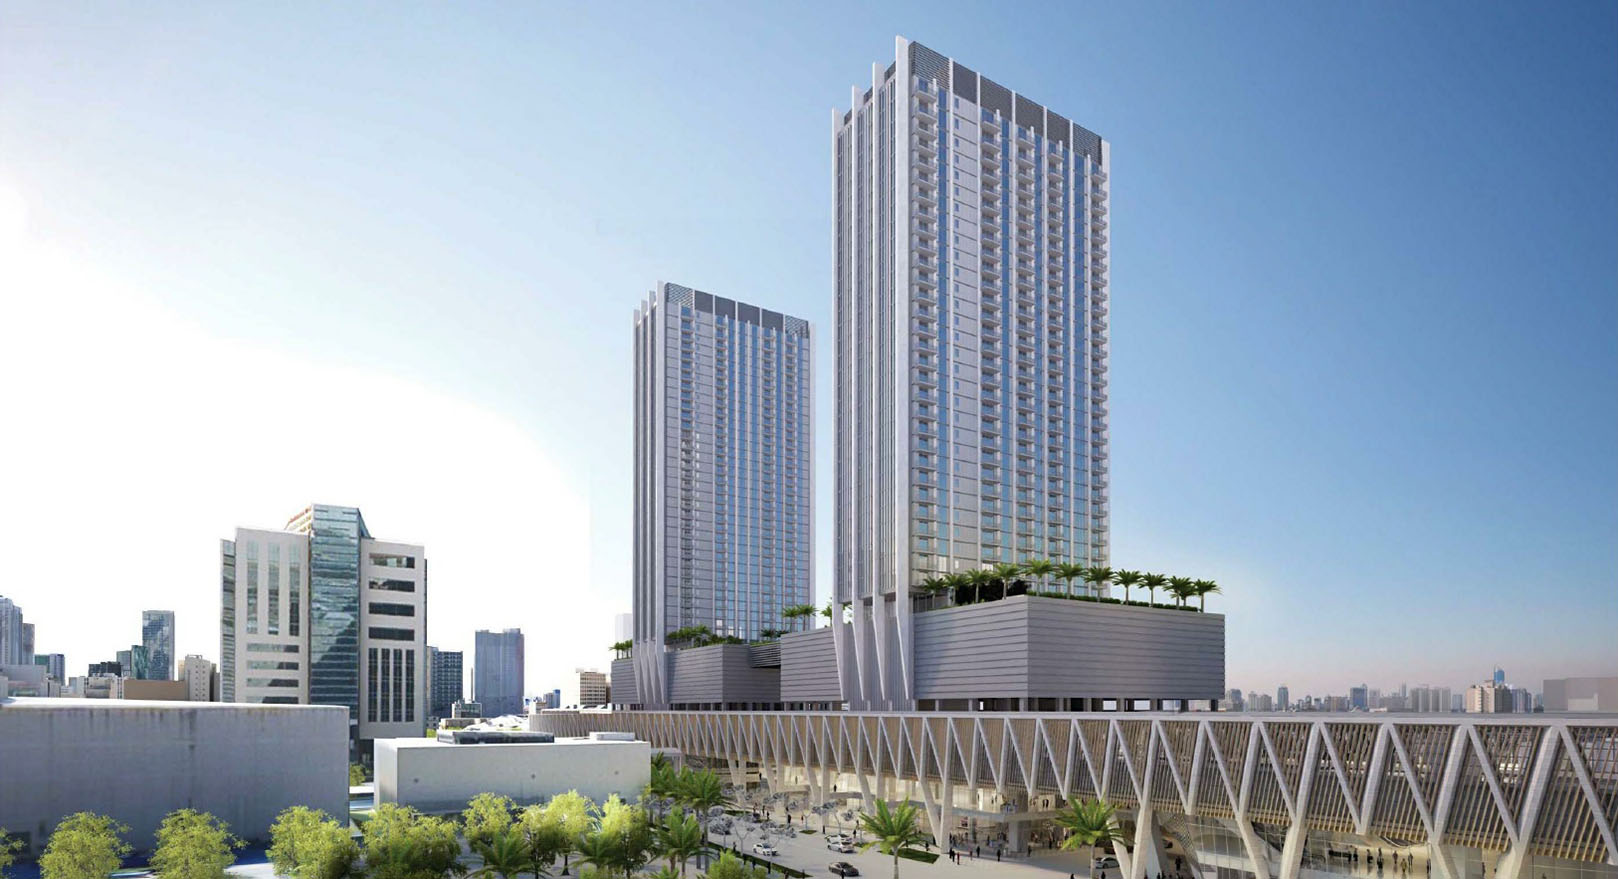 Colossal Miami development: The Parkline Towers at MiamiCentral integrates two residential towers, 30 and 33-floors tall, with 816 apartment units, the Central Fare food hall and a major transit hub.